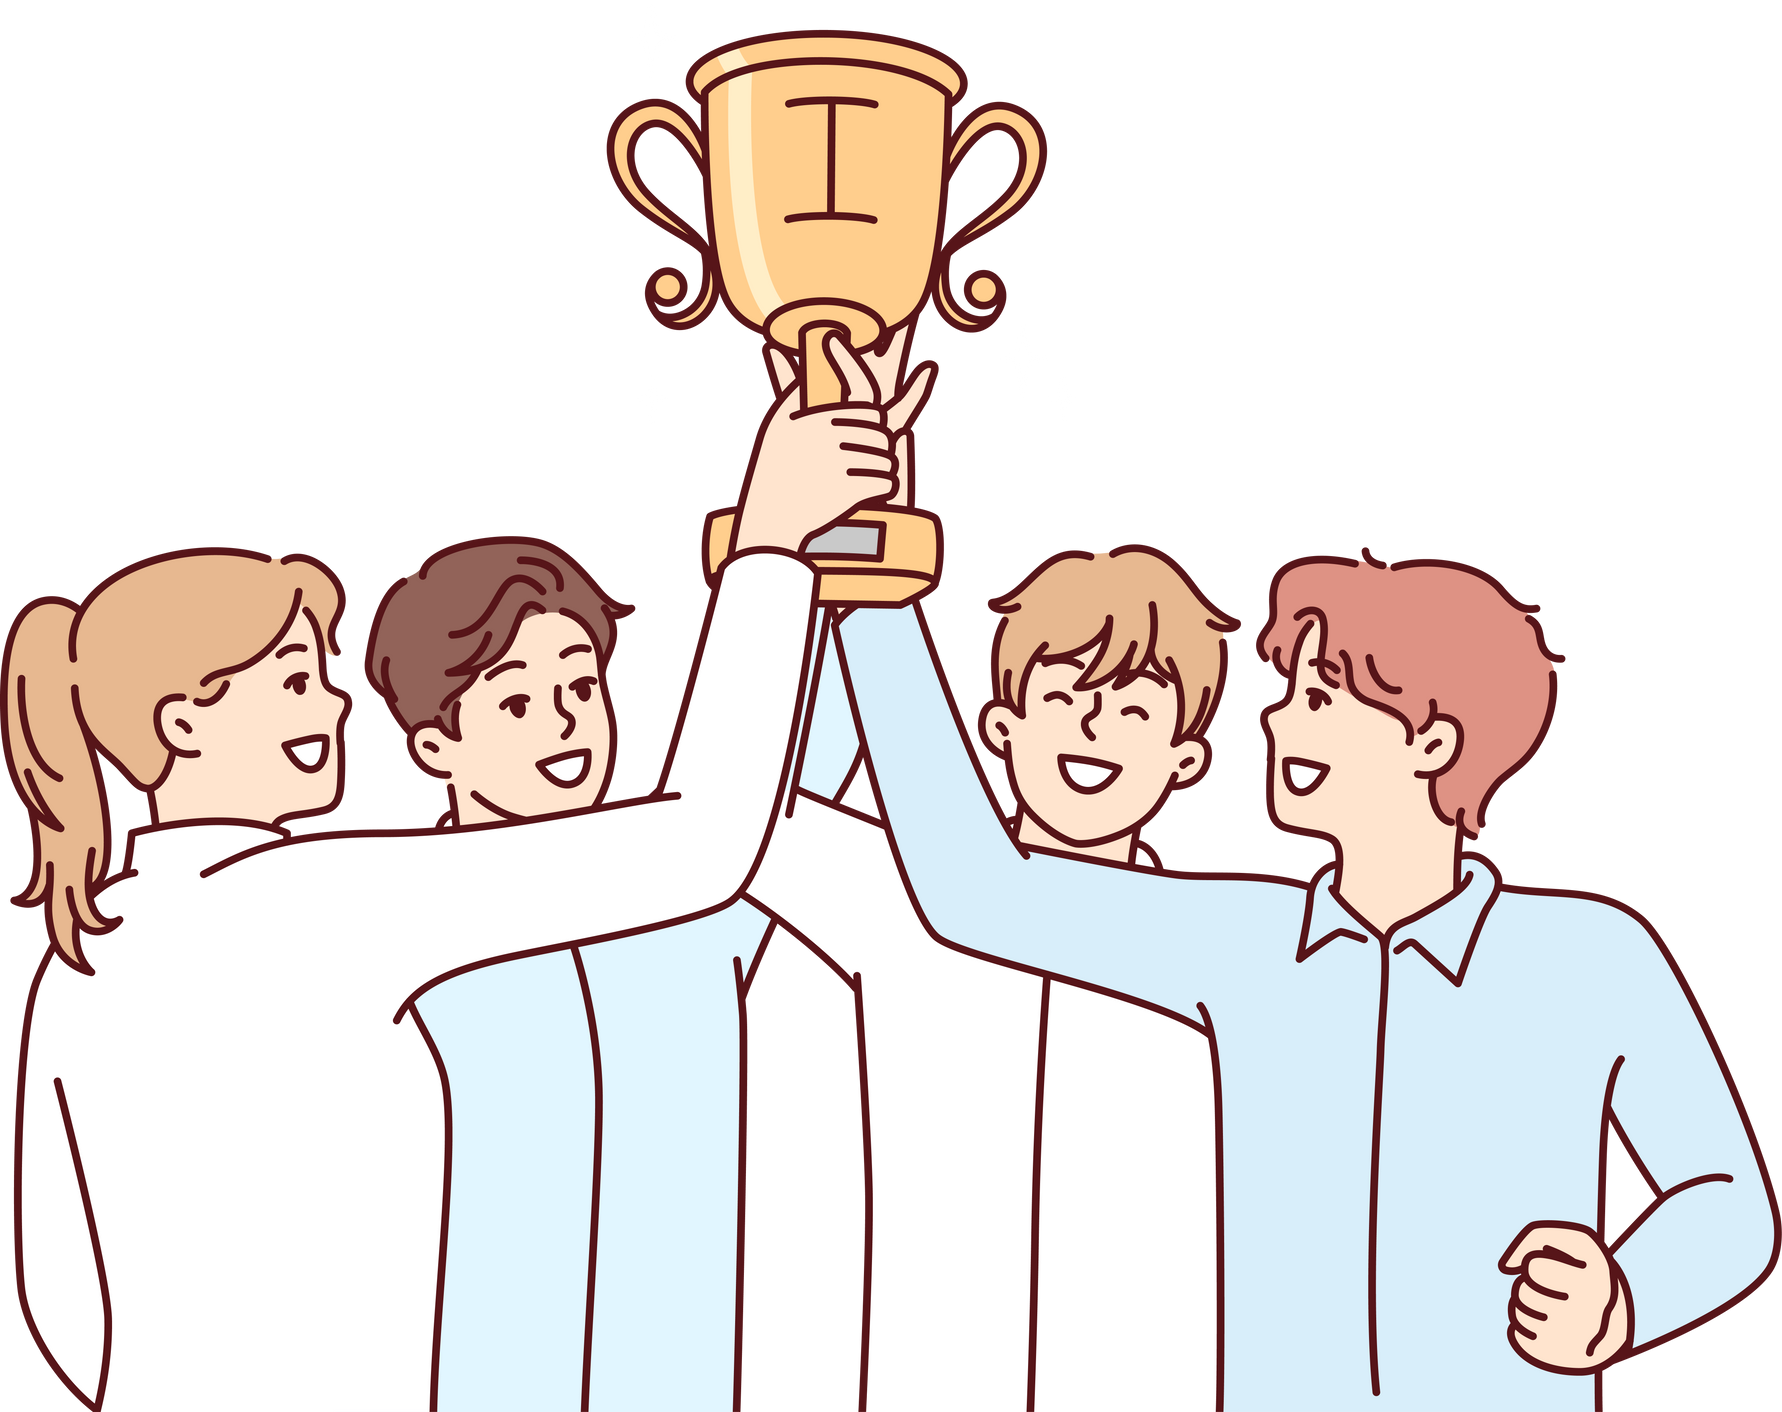 Tight-Knit Team of Startup Raises Cup over Heads after Winning in Business Competition. Vector Image